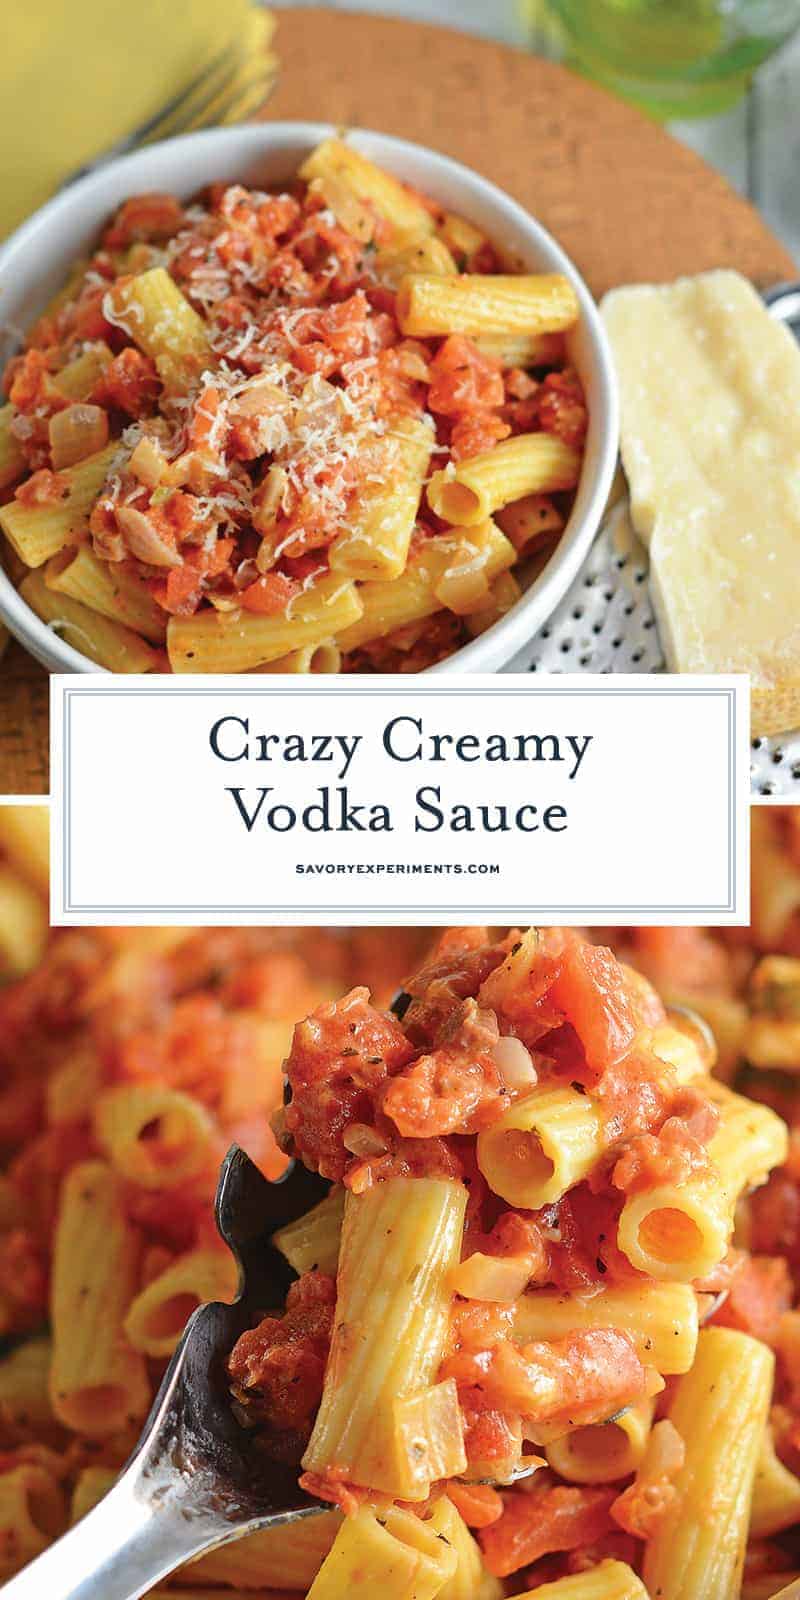 Creamy Vodka Sauce is an easy pasta sauce recipe pancetta, tomatoes and cream. Serve over your favorite pasta like Penne alla Vodka! #vokdasauce #penneallavodka www.savoryexperiments.com 